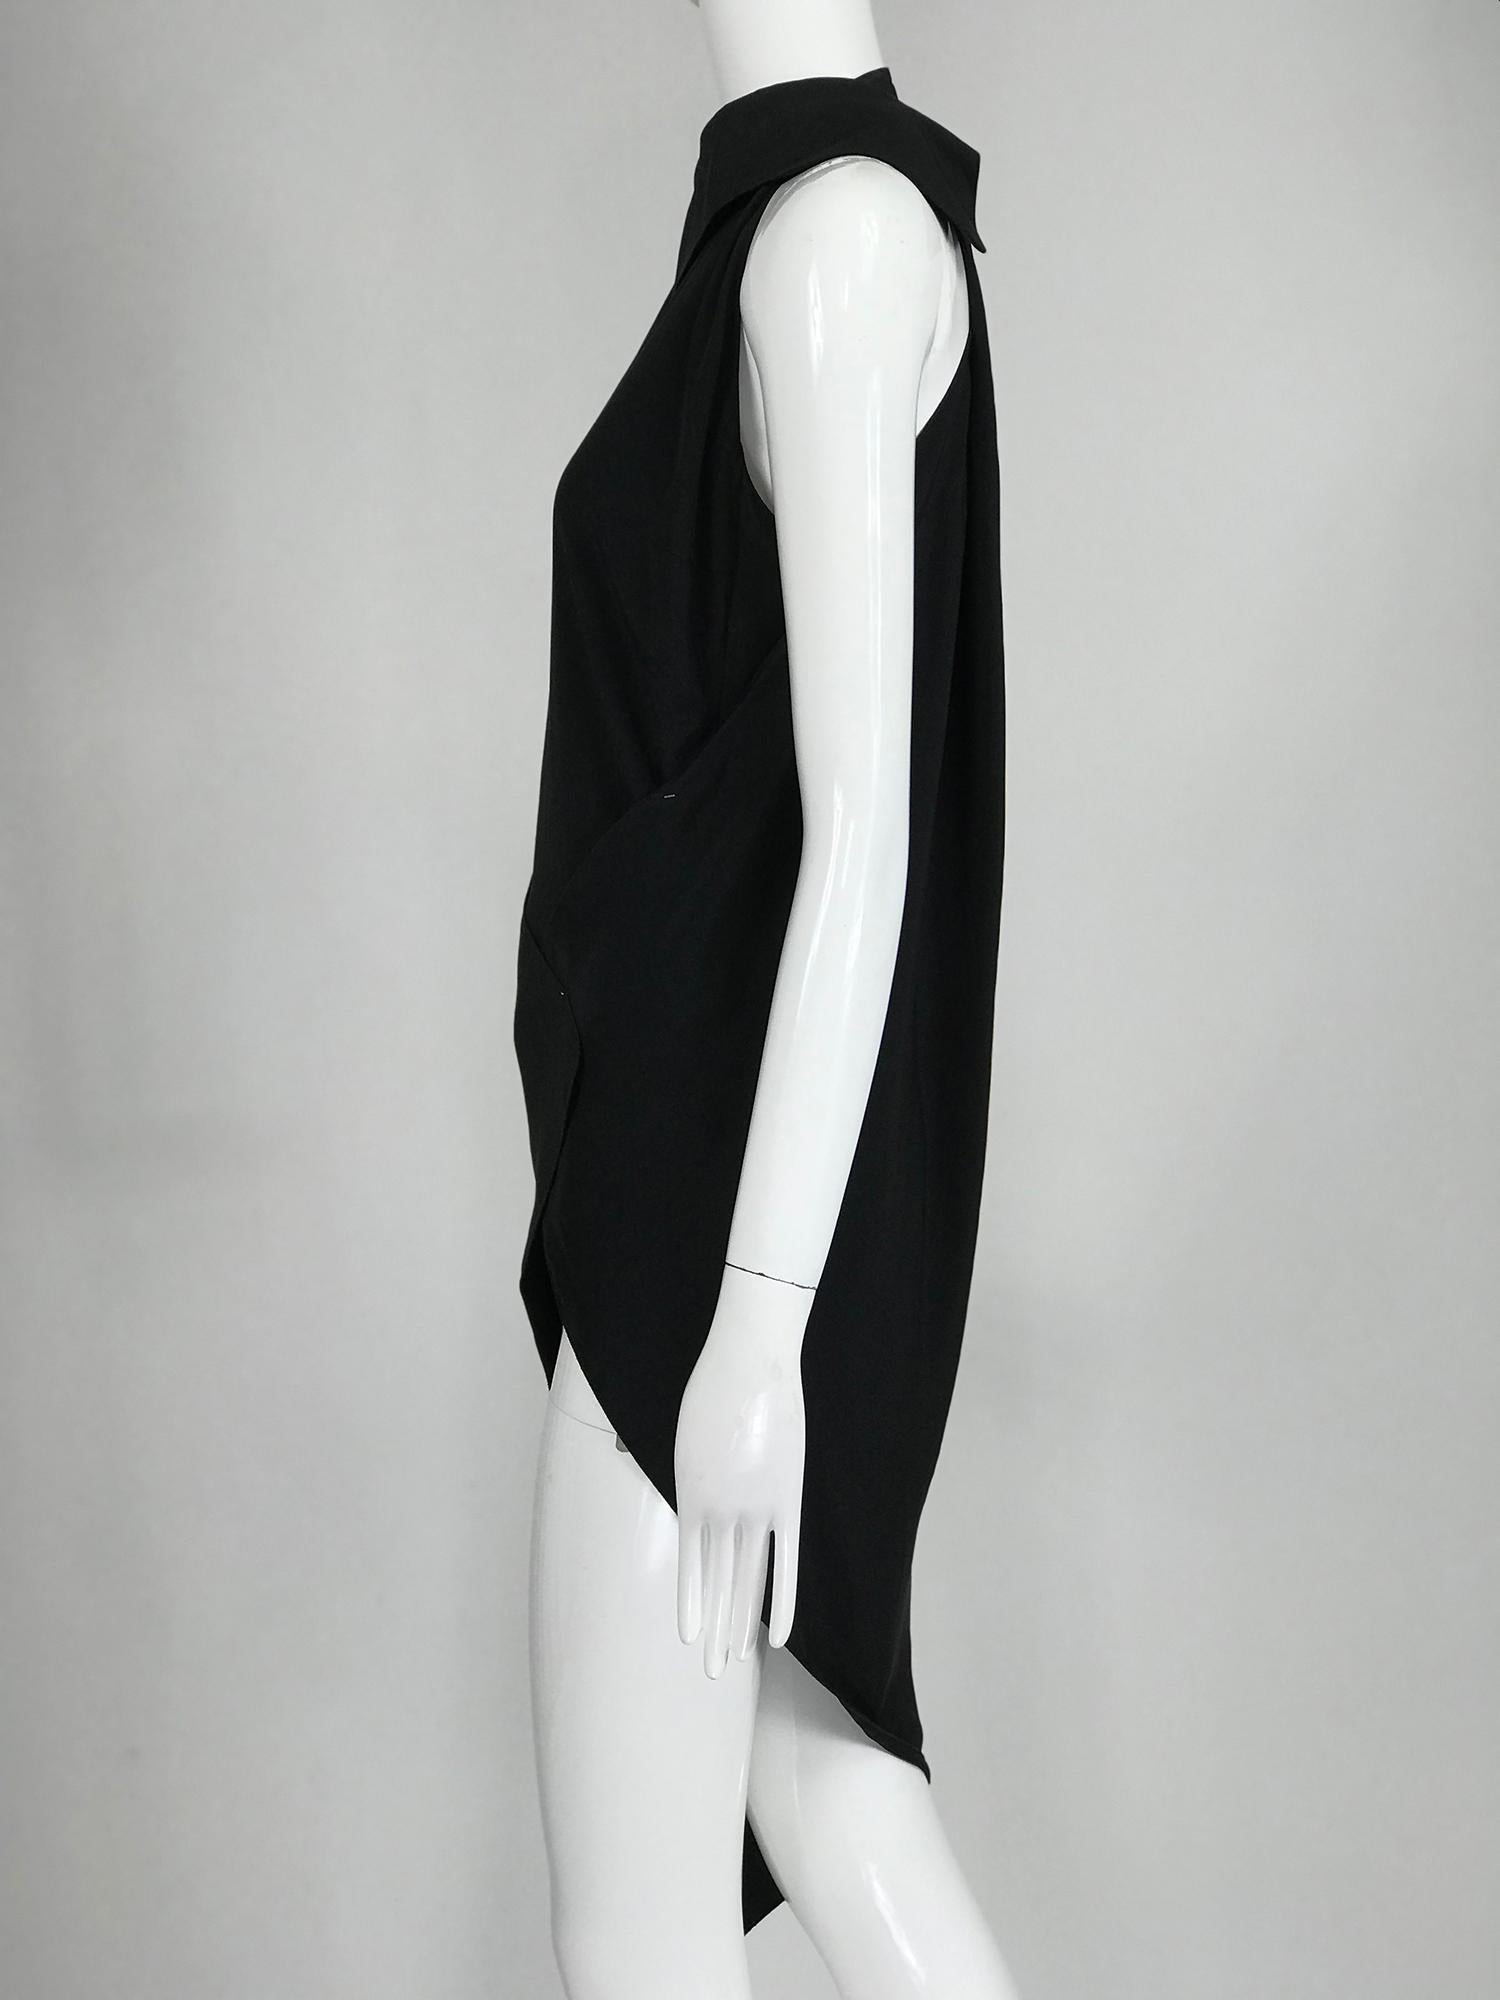 Gianfranco Ferre Black Silk and Sweater Knit Body Suit and Wrap or Drape 1980s For Sale 1